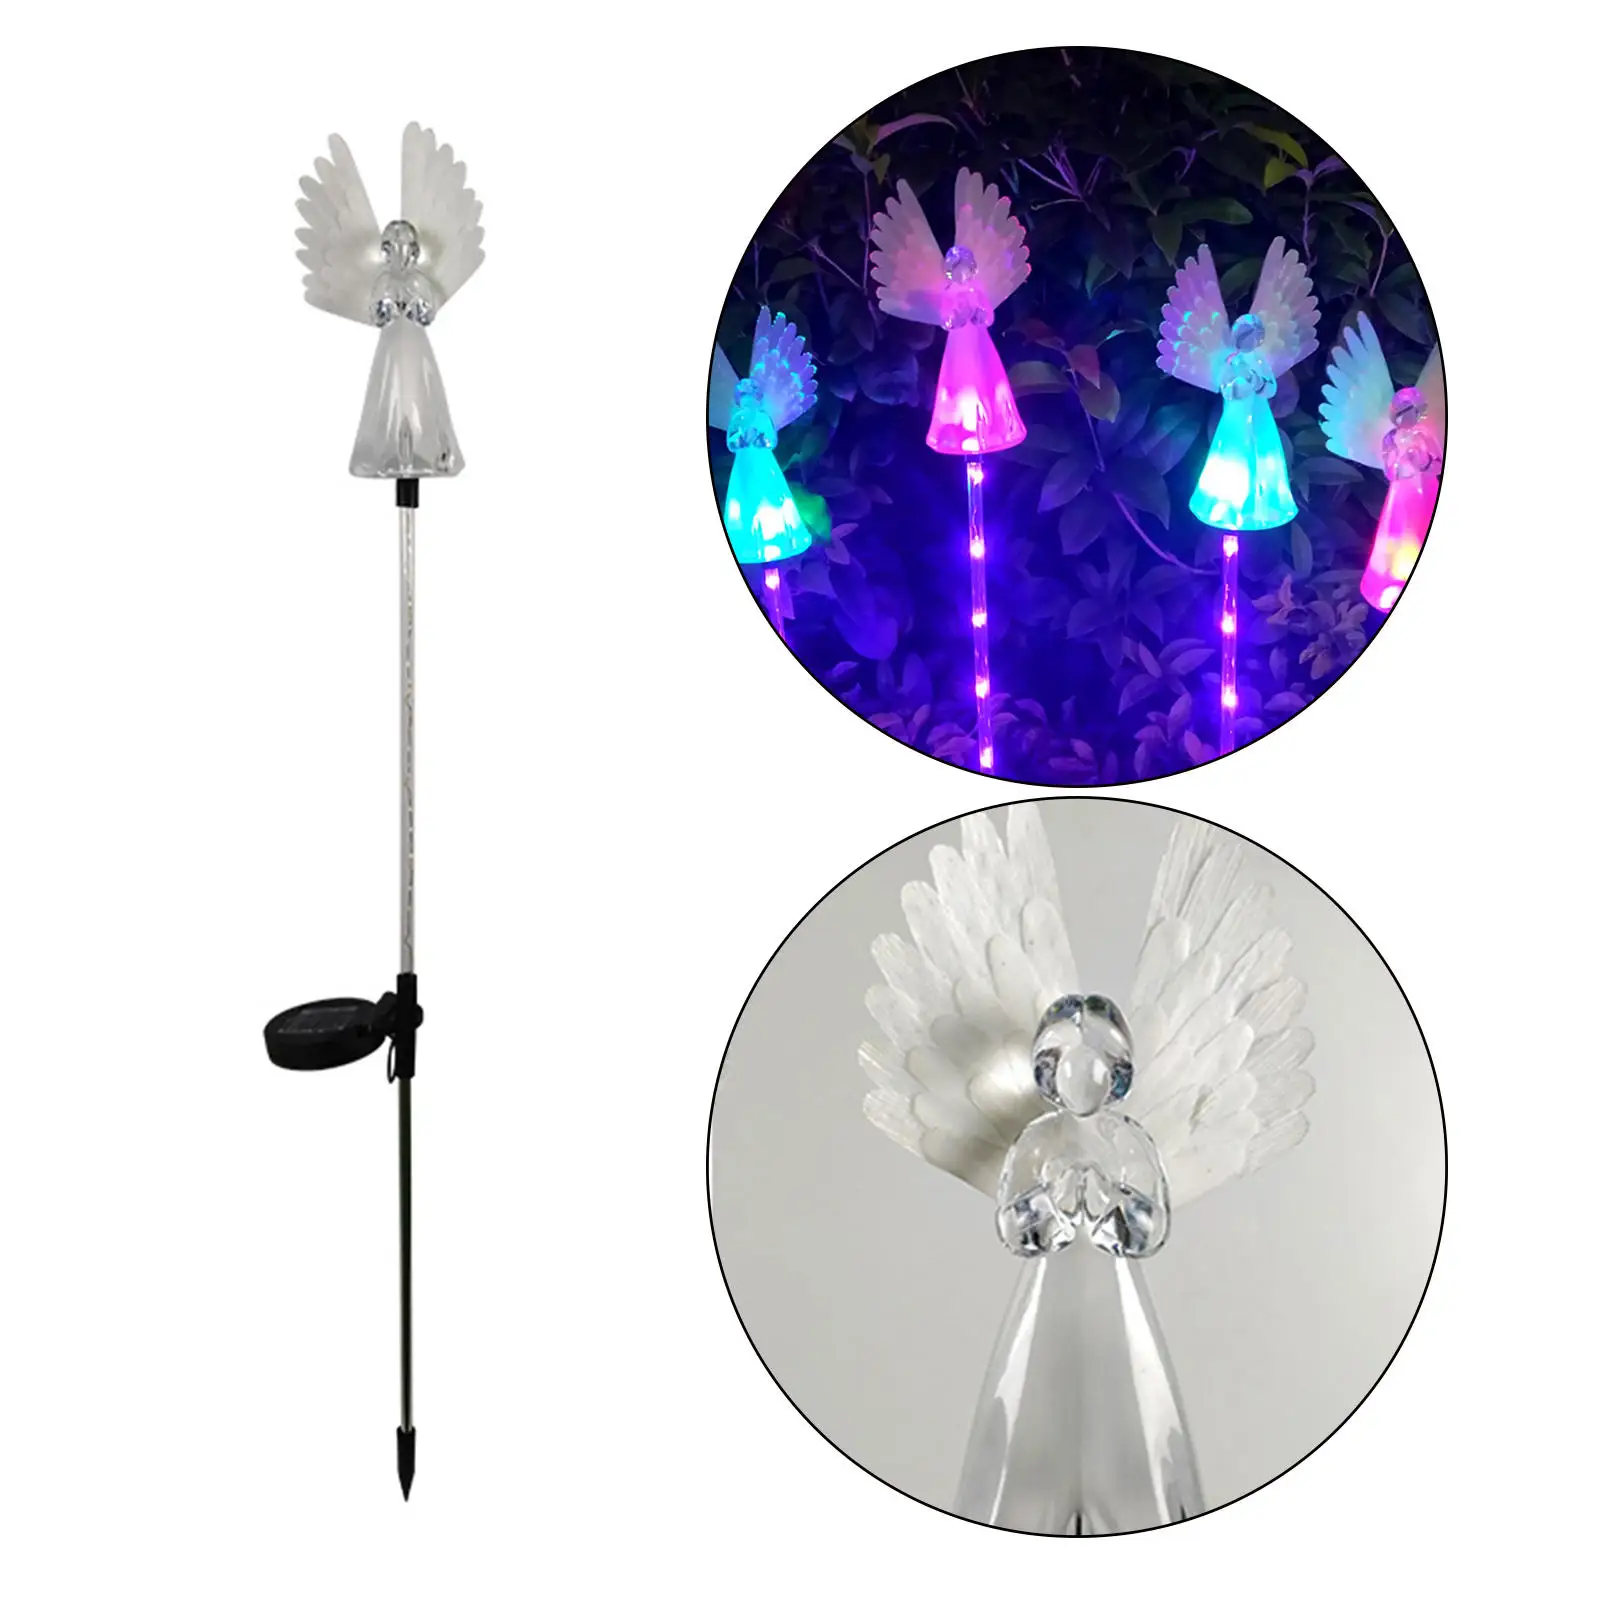 Stainless Steel Solar Angel Lights with Ground Stake Outdoor Street Pathway Lights Housewarming Gift